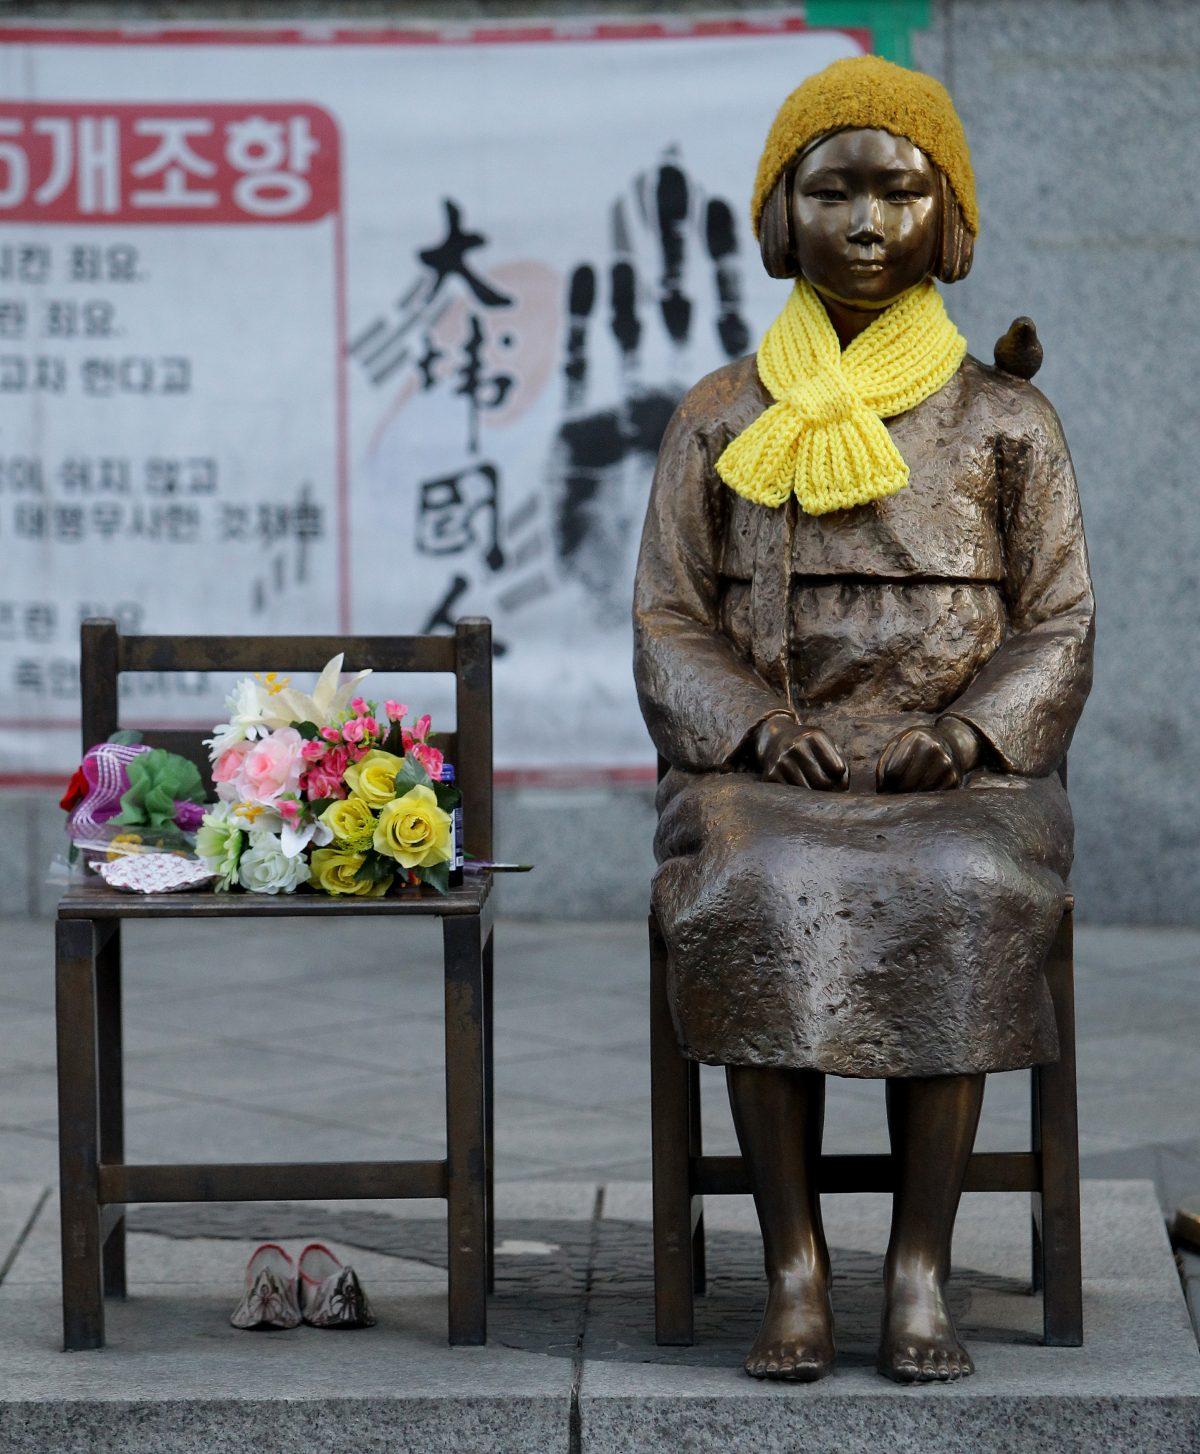 A statue of a girl symbolizing the issue of "comfort women" in front of the Japanese Embassy in Seoul, South Korea, on Dec. 28, 2015. (Chung Sung-jun/Getty Images)